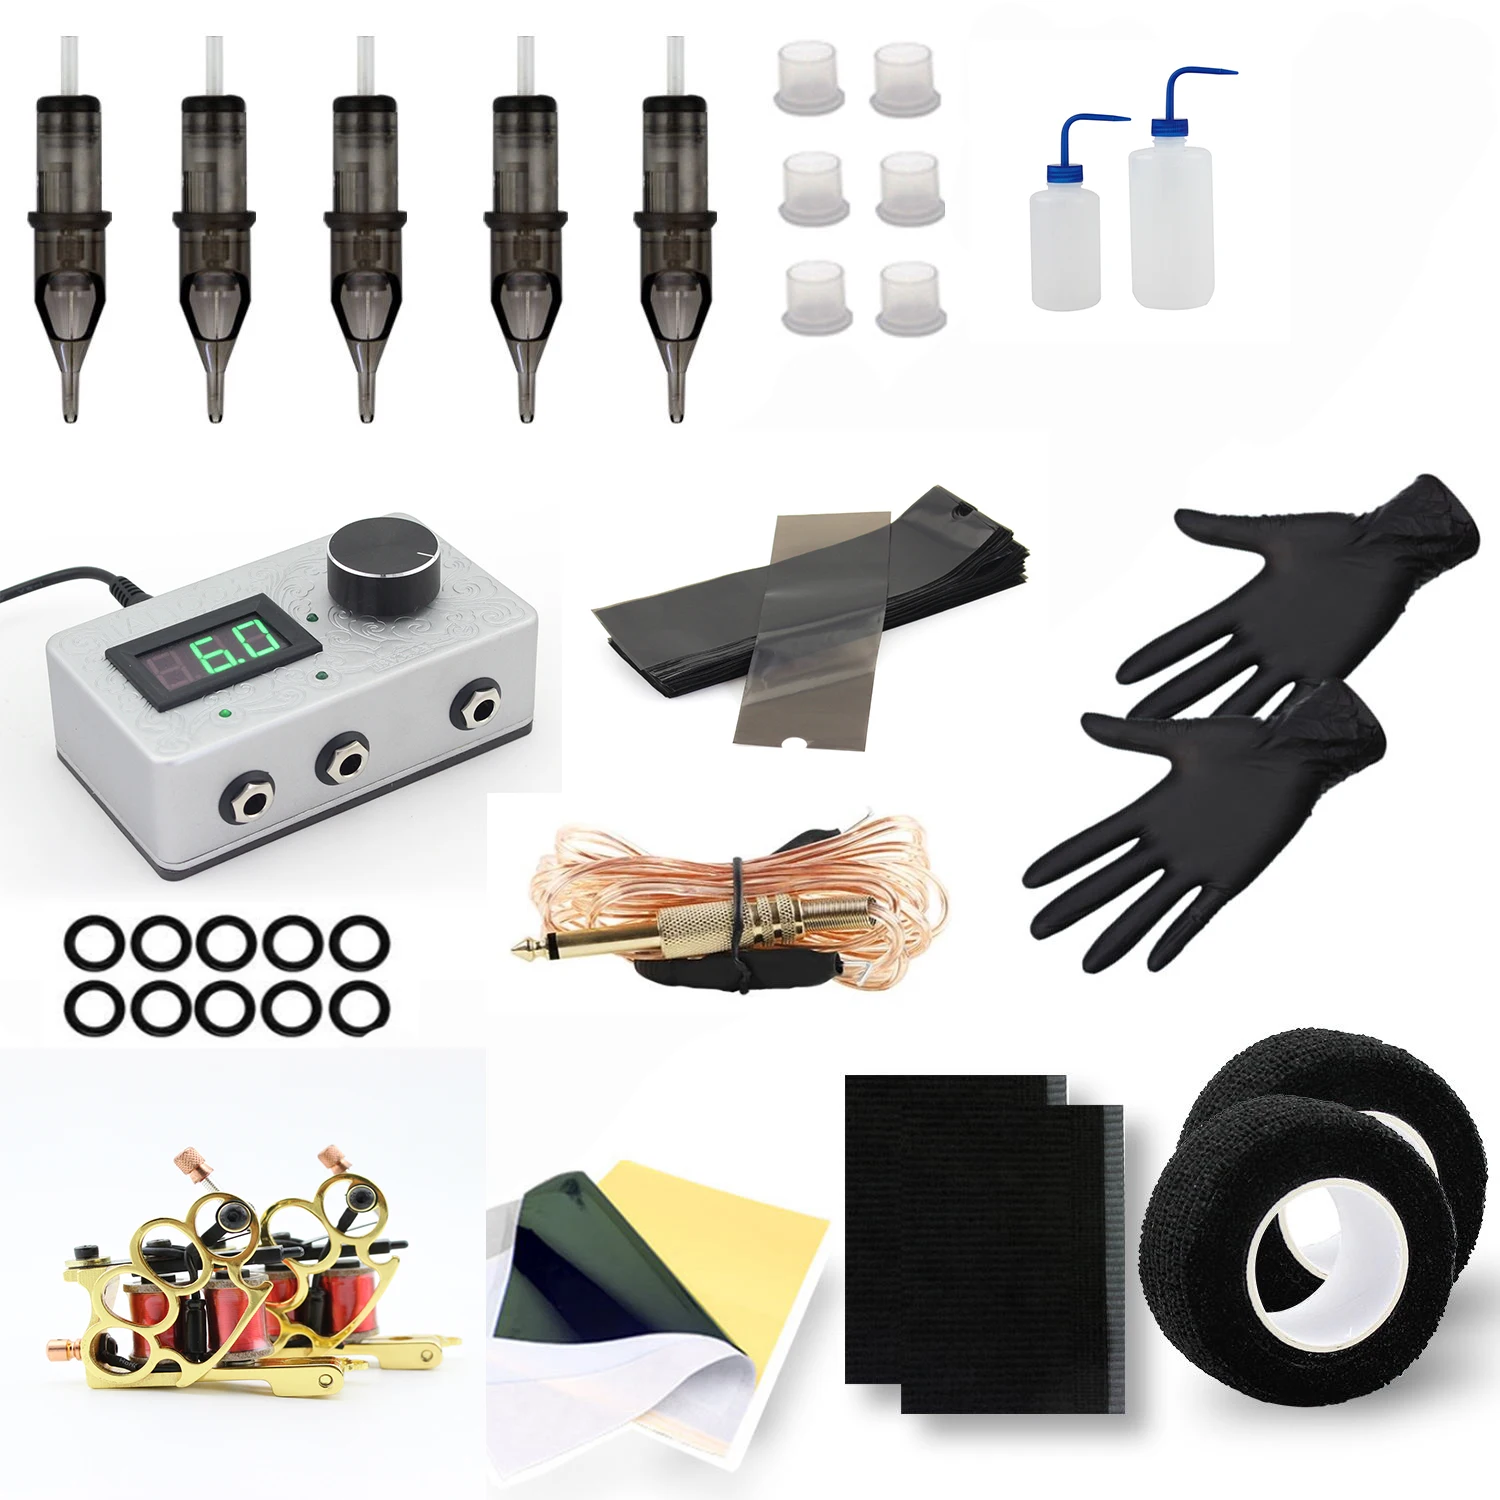 DISCOVER DEVICE Tattoo Kit Tattoo Coil Machine Motor Complete Tattoo Set Accessories Supply Kit